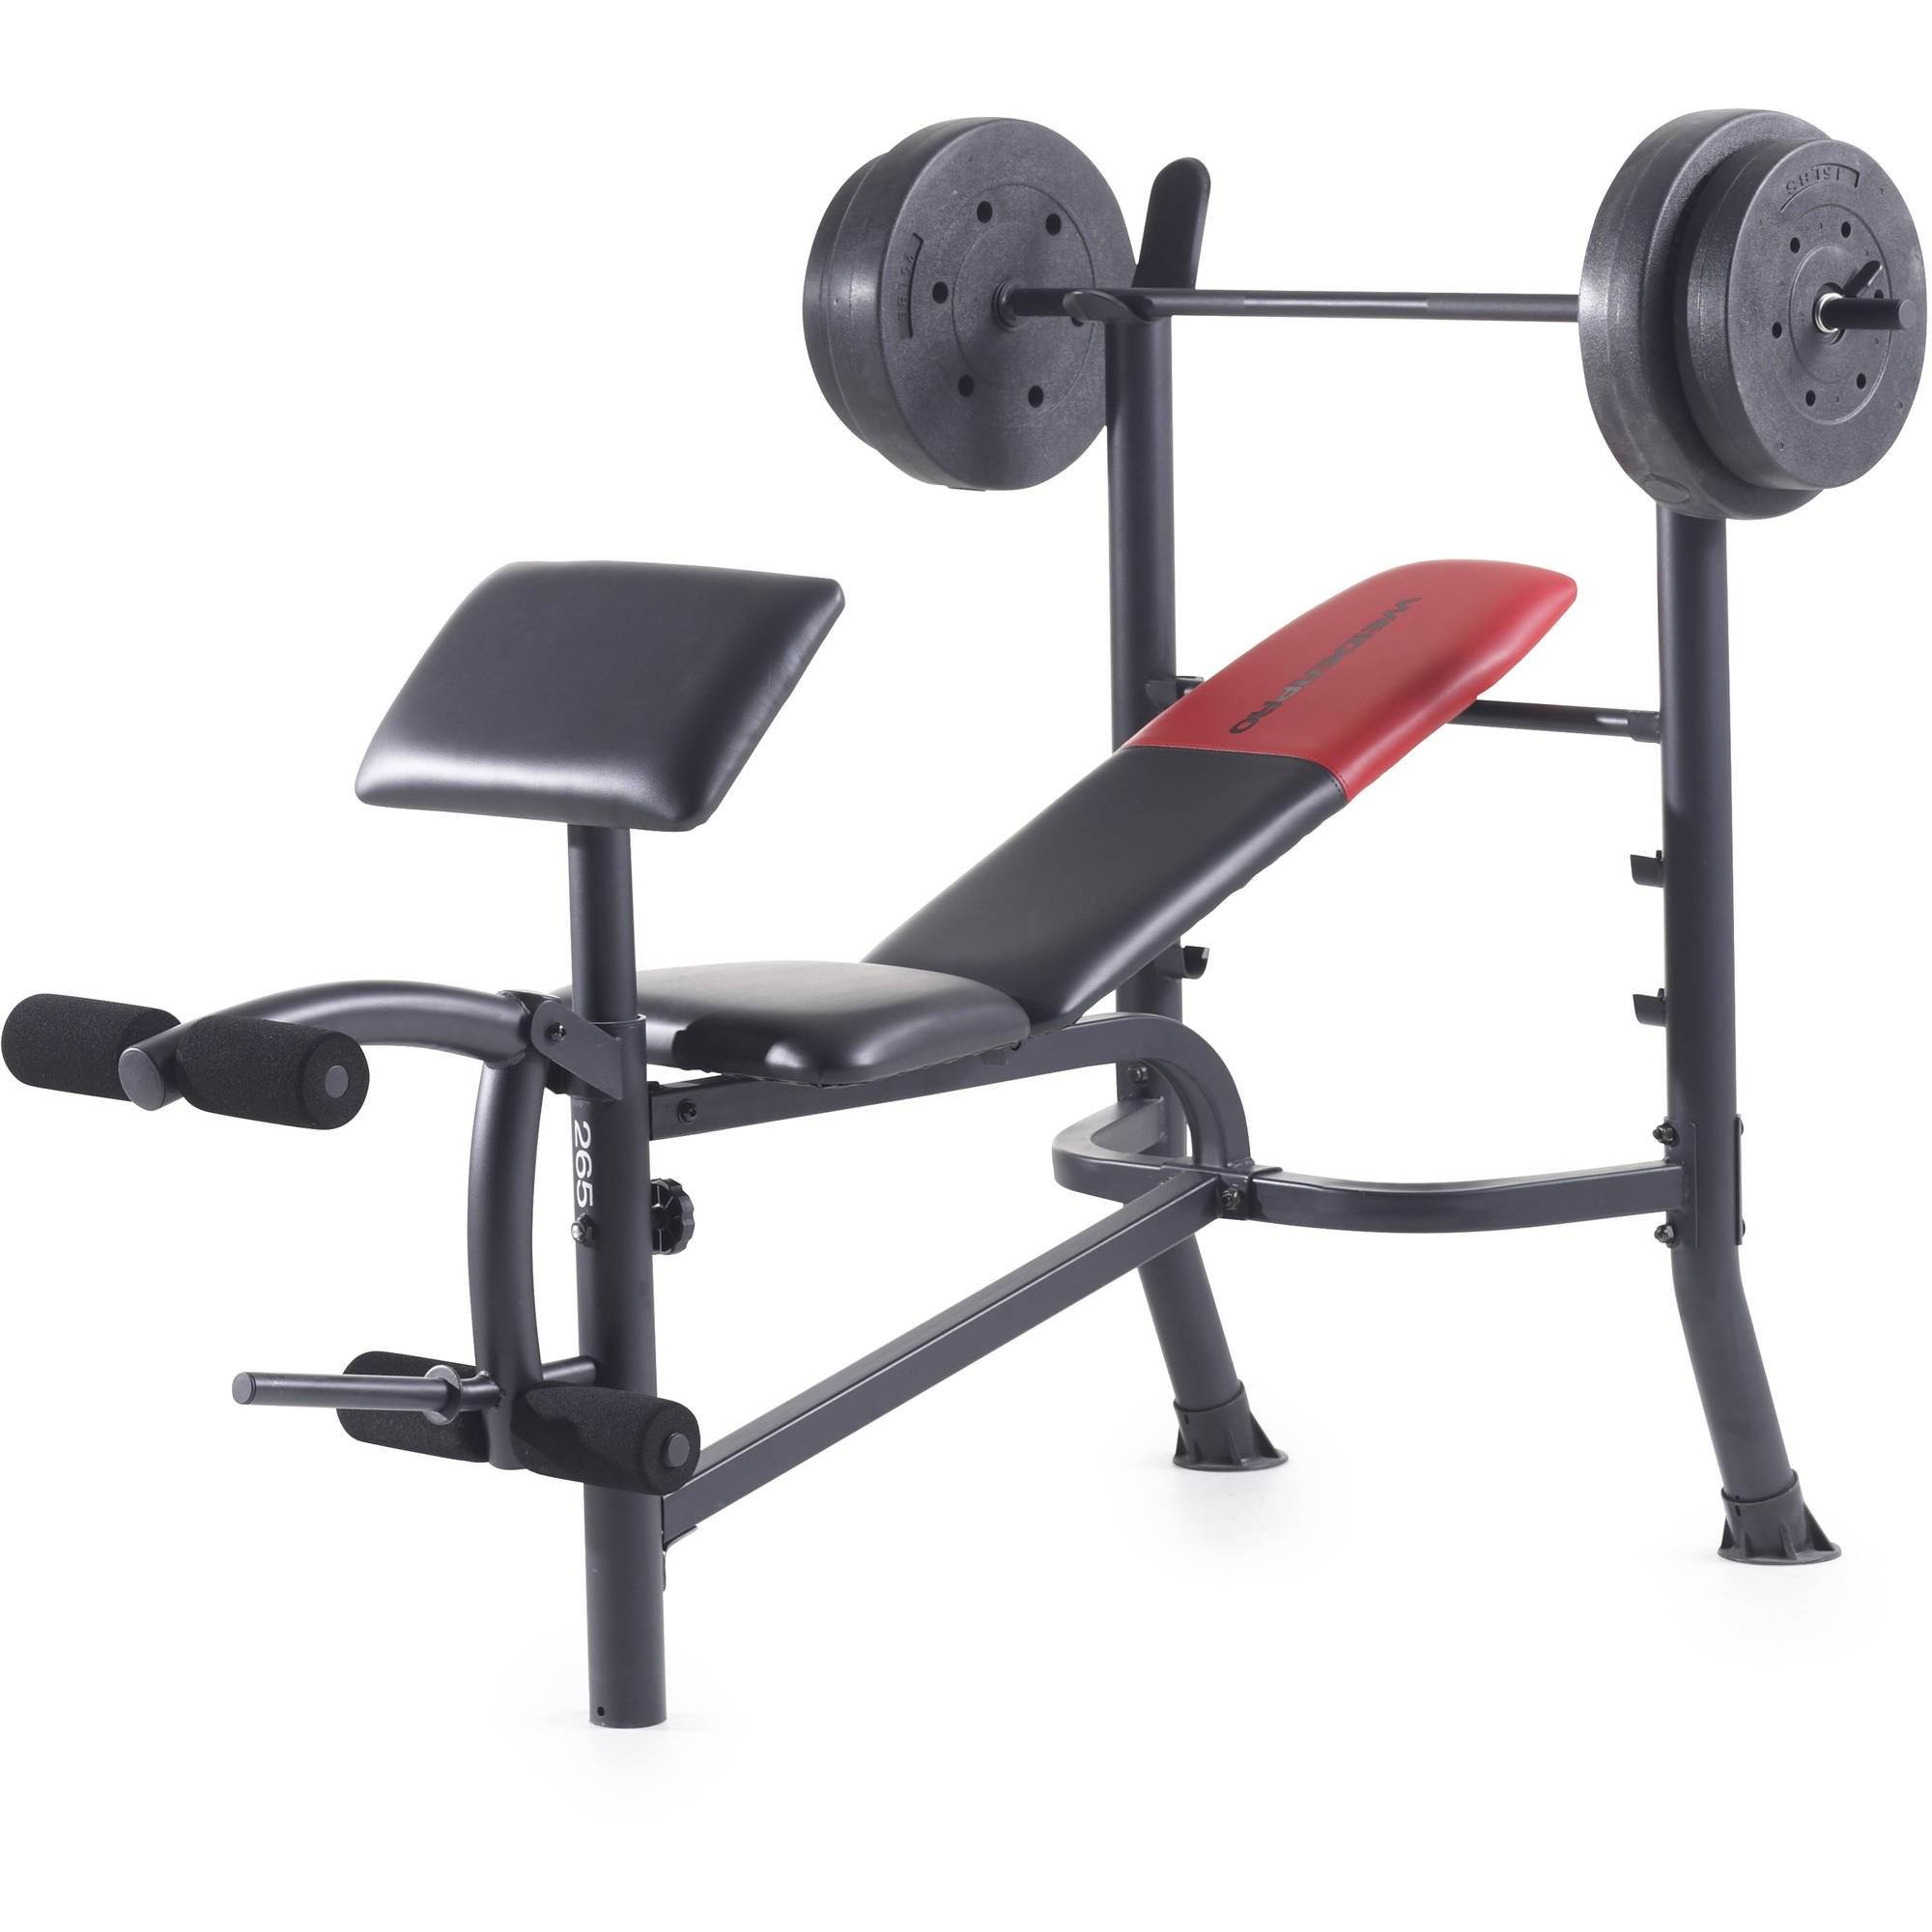 Weider Pro 265 Standard Weight Bench with 80 lb. Vinyl Weight Set - image 1 of 8